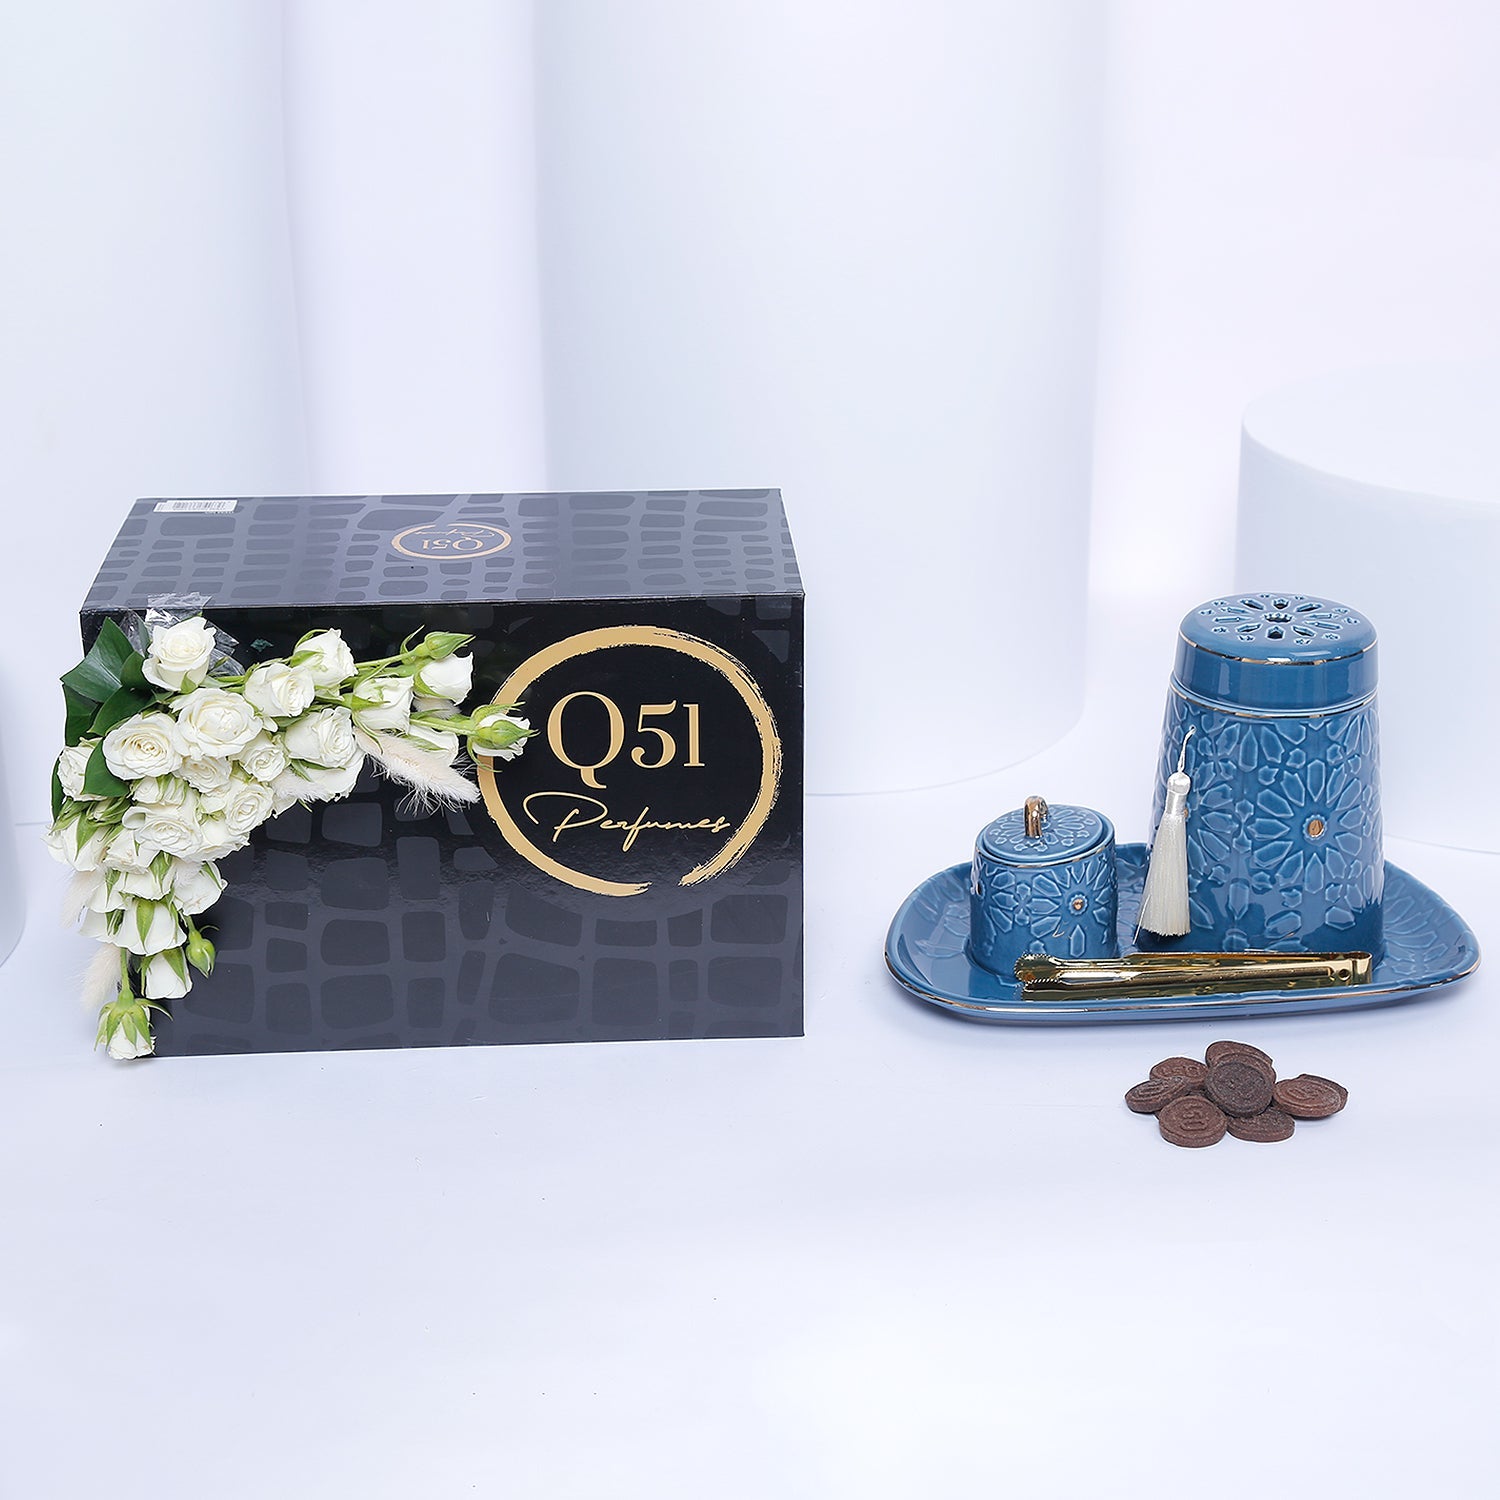 Blue Incense Burner from Q51 Perfumes